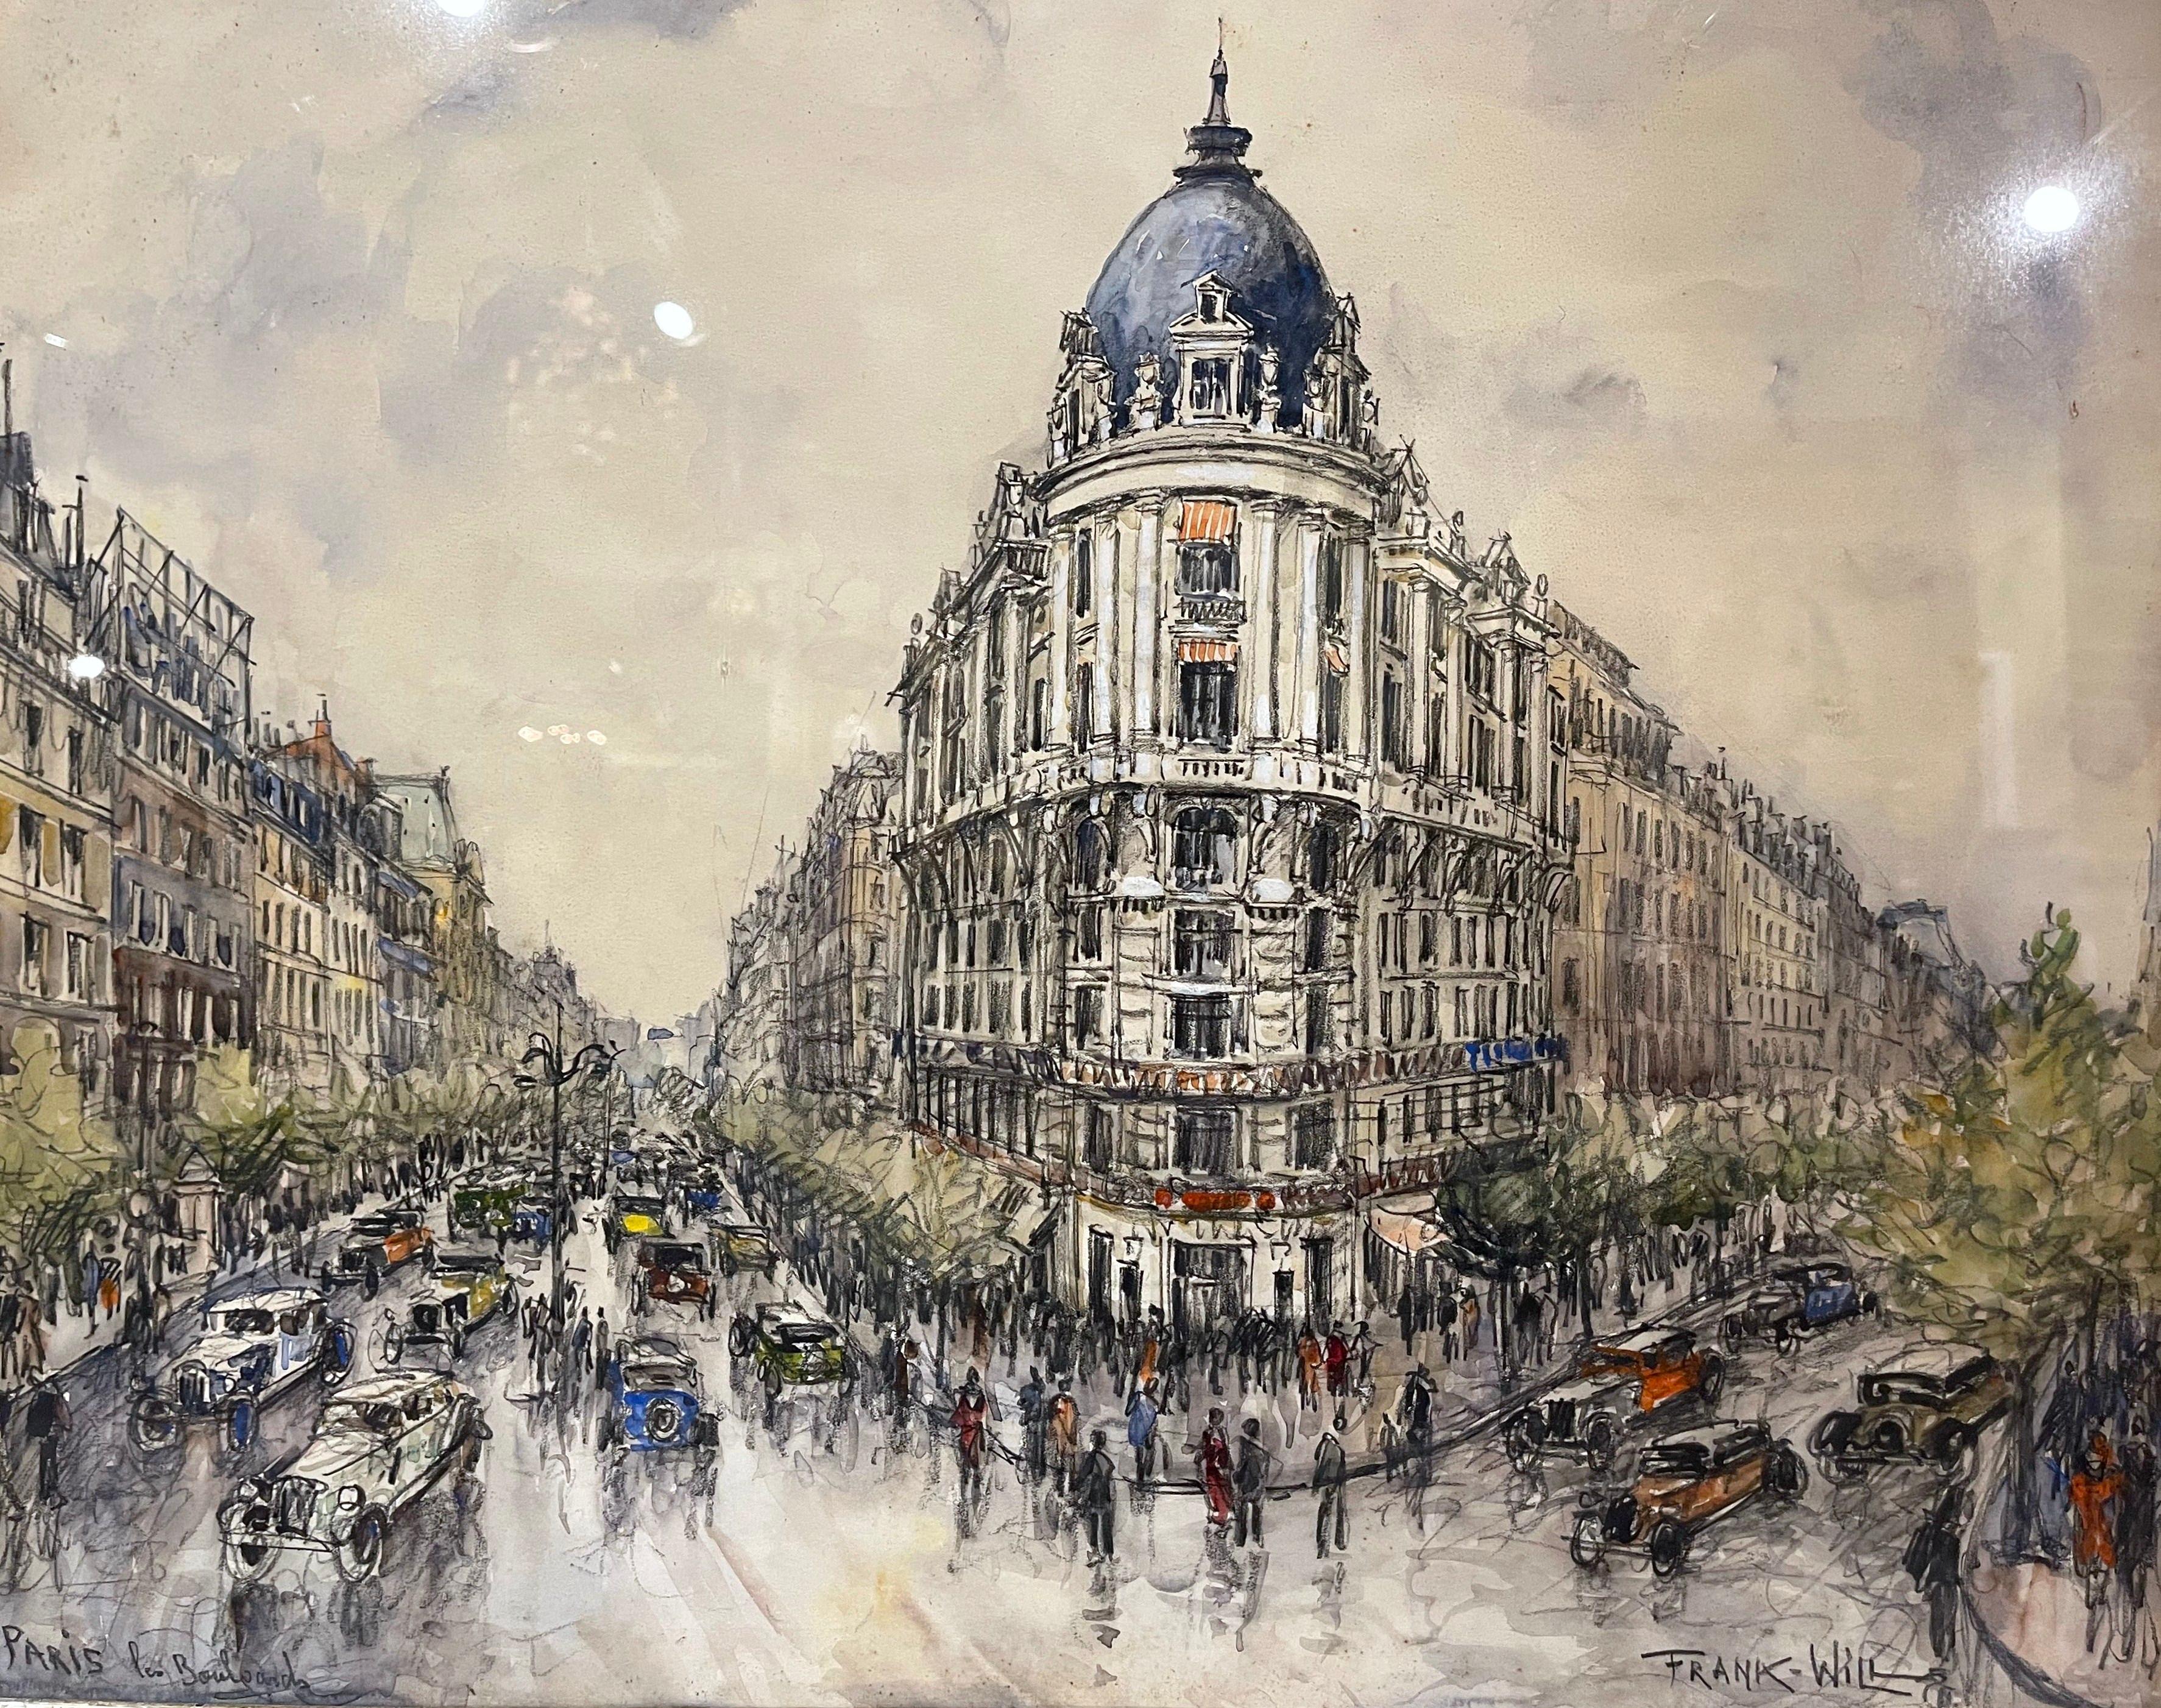 Decorate an office or study with this large watercolor painting. Created in Paris, France circa 1930, and set in a gilt carved frame preserved with protective glass, the artwork titled “Paris Les Boulevards”, depicts an iconic Paris district, the